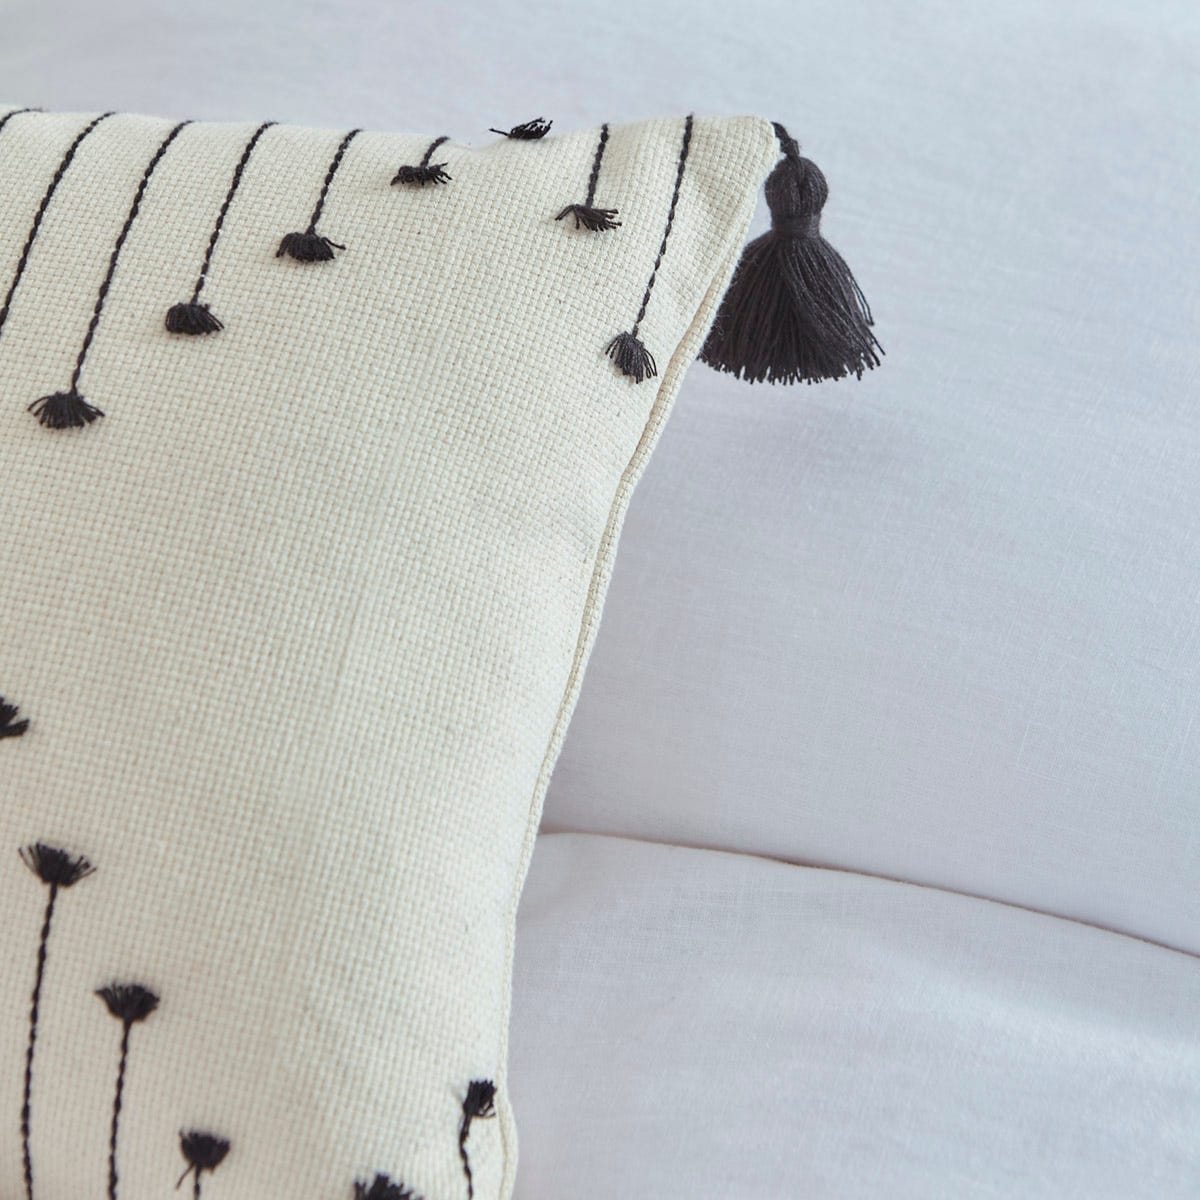 Embroidered Tasselled Tufted Cushion Cover - Natural/Black - DUSK